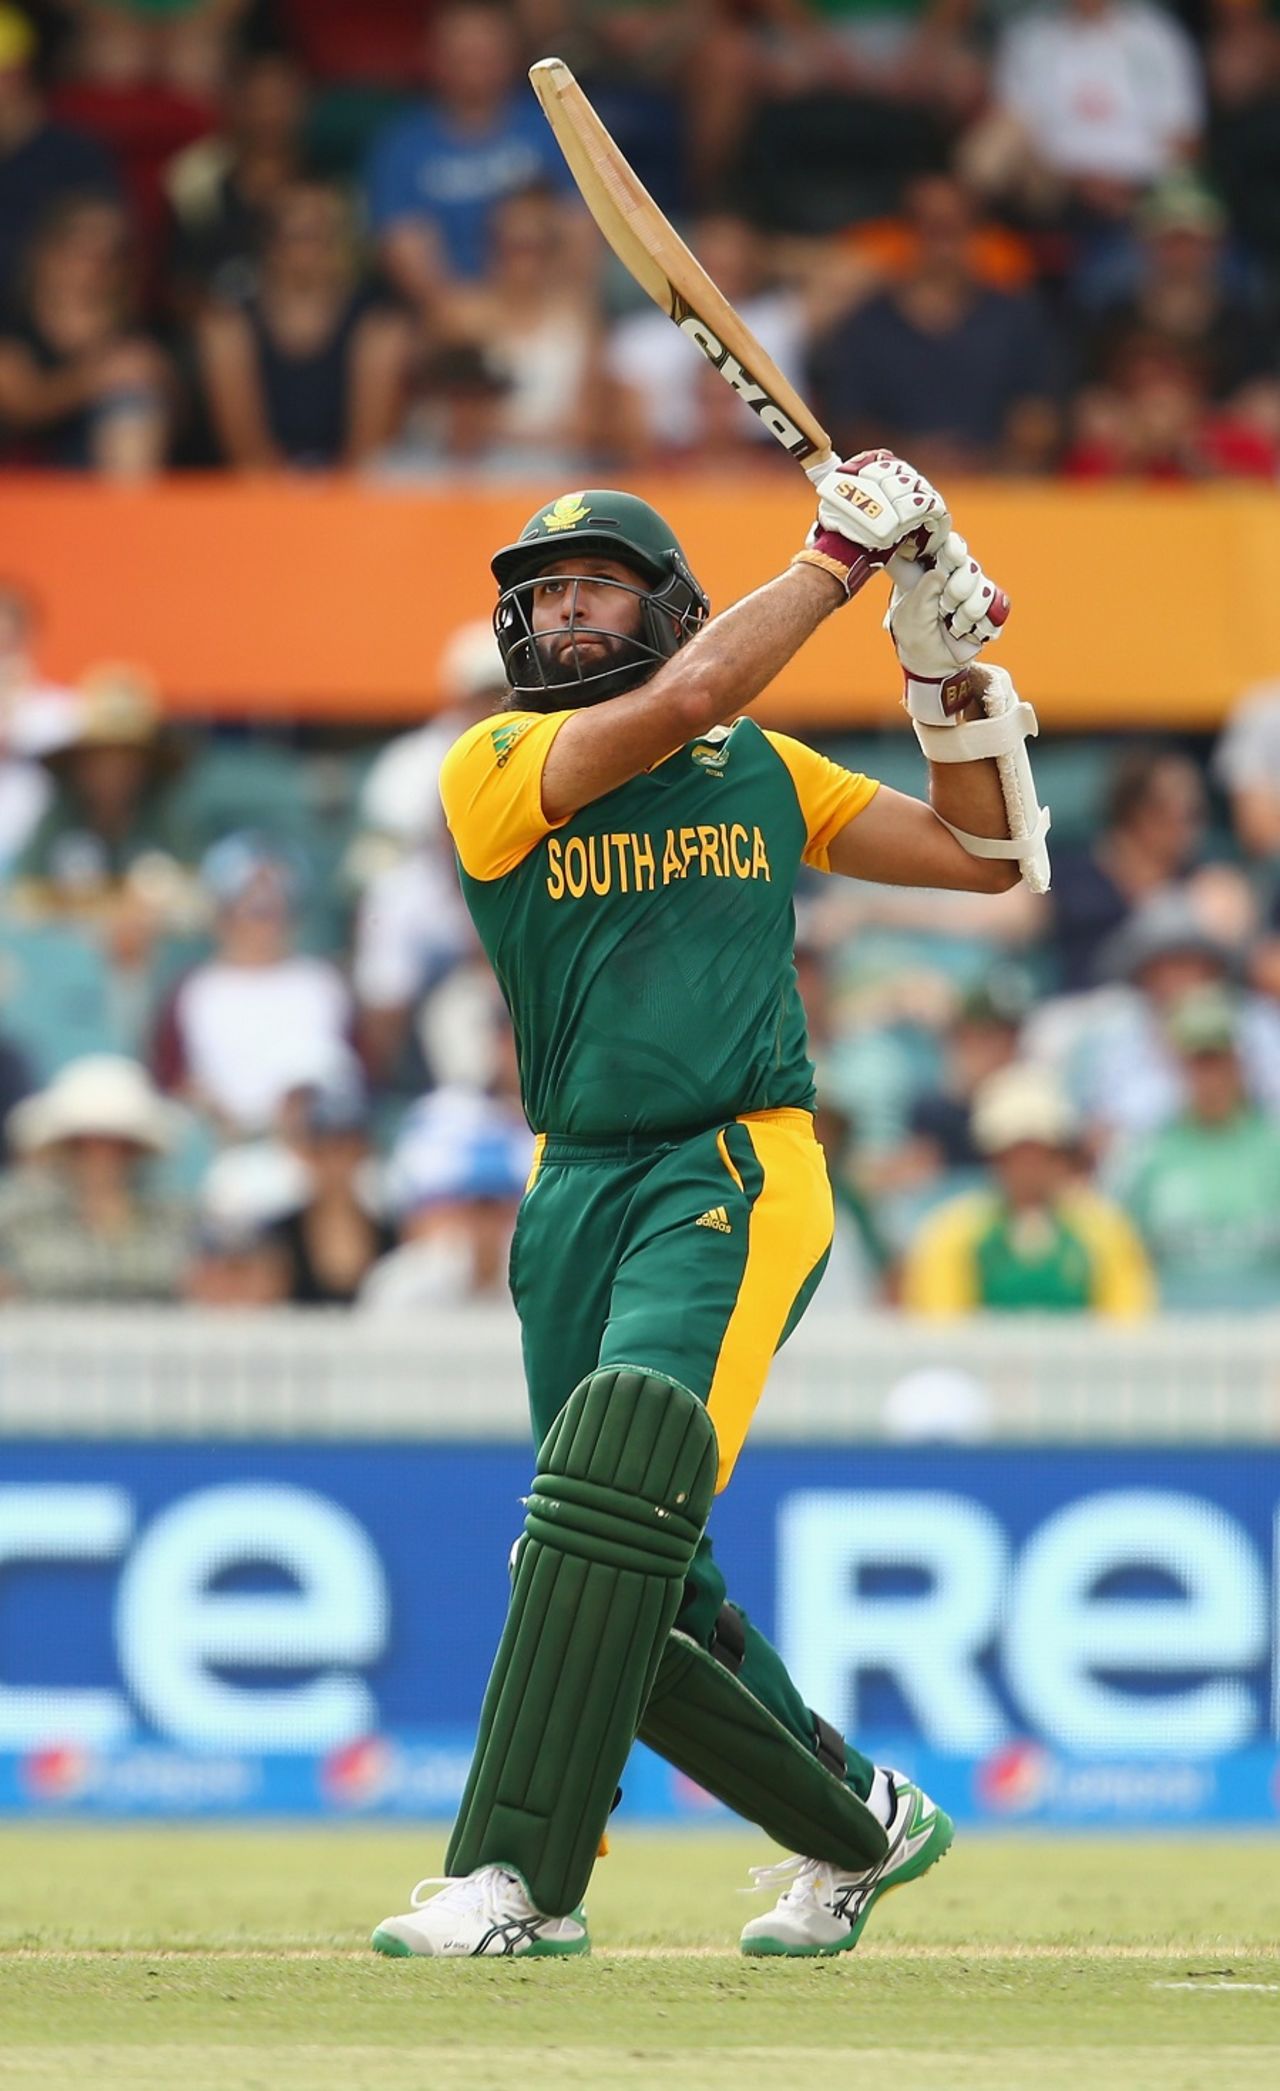 Hashim Amla became the fastest to 20 ODI centuries, Ireland v South Africa, World Cup 2015, Group B, Canberra, March 3, 2015